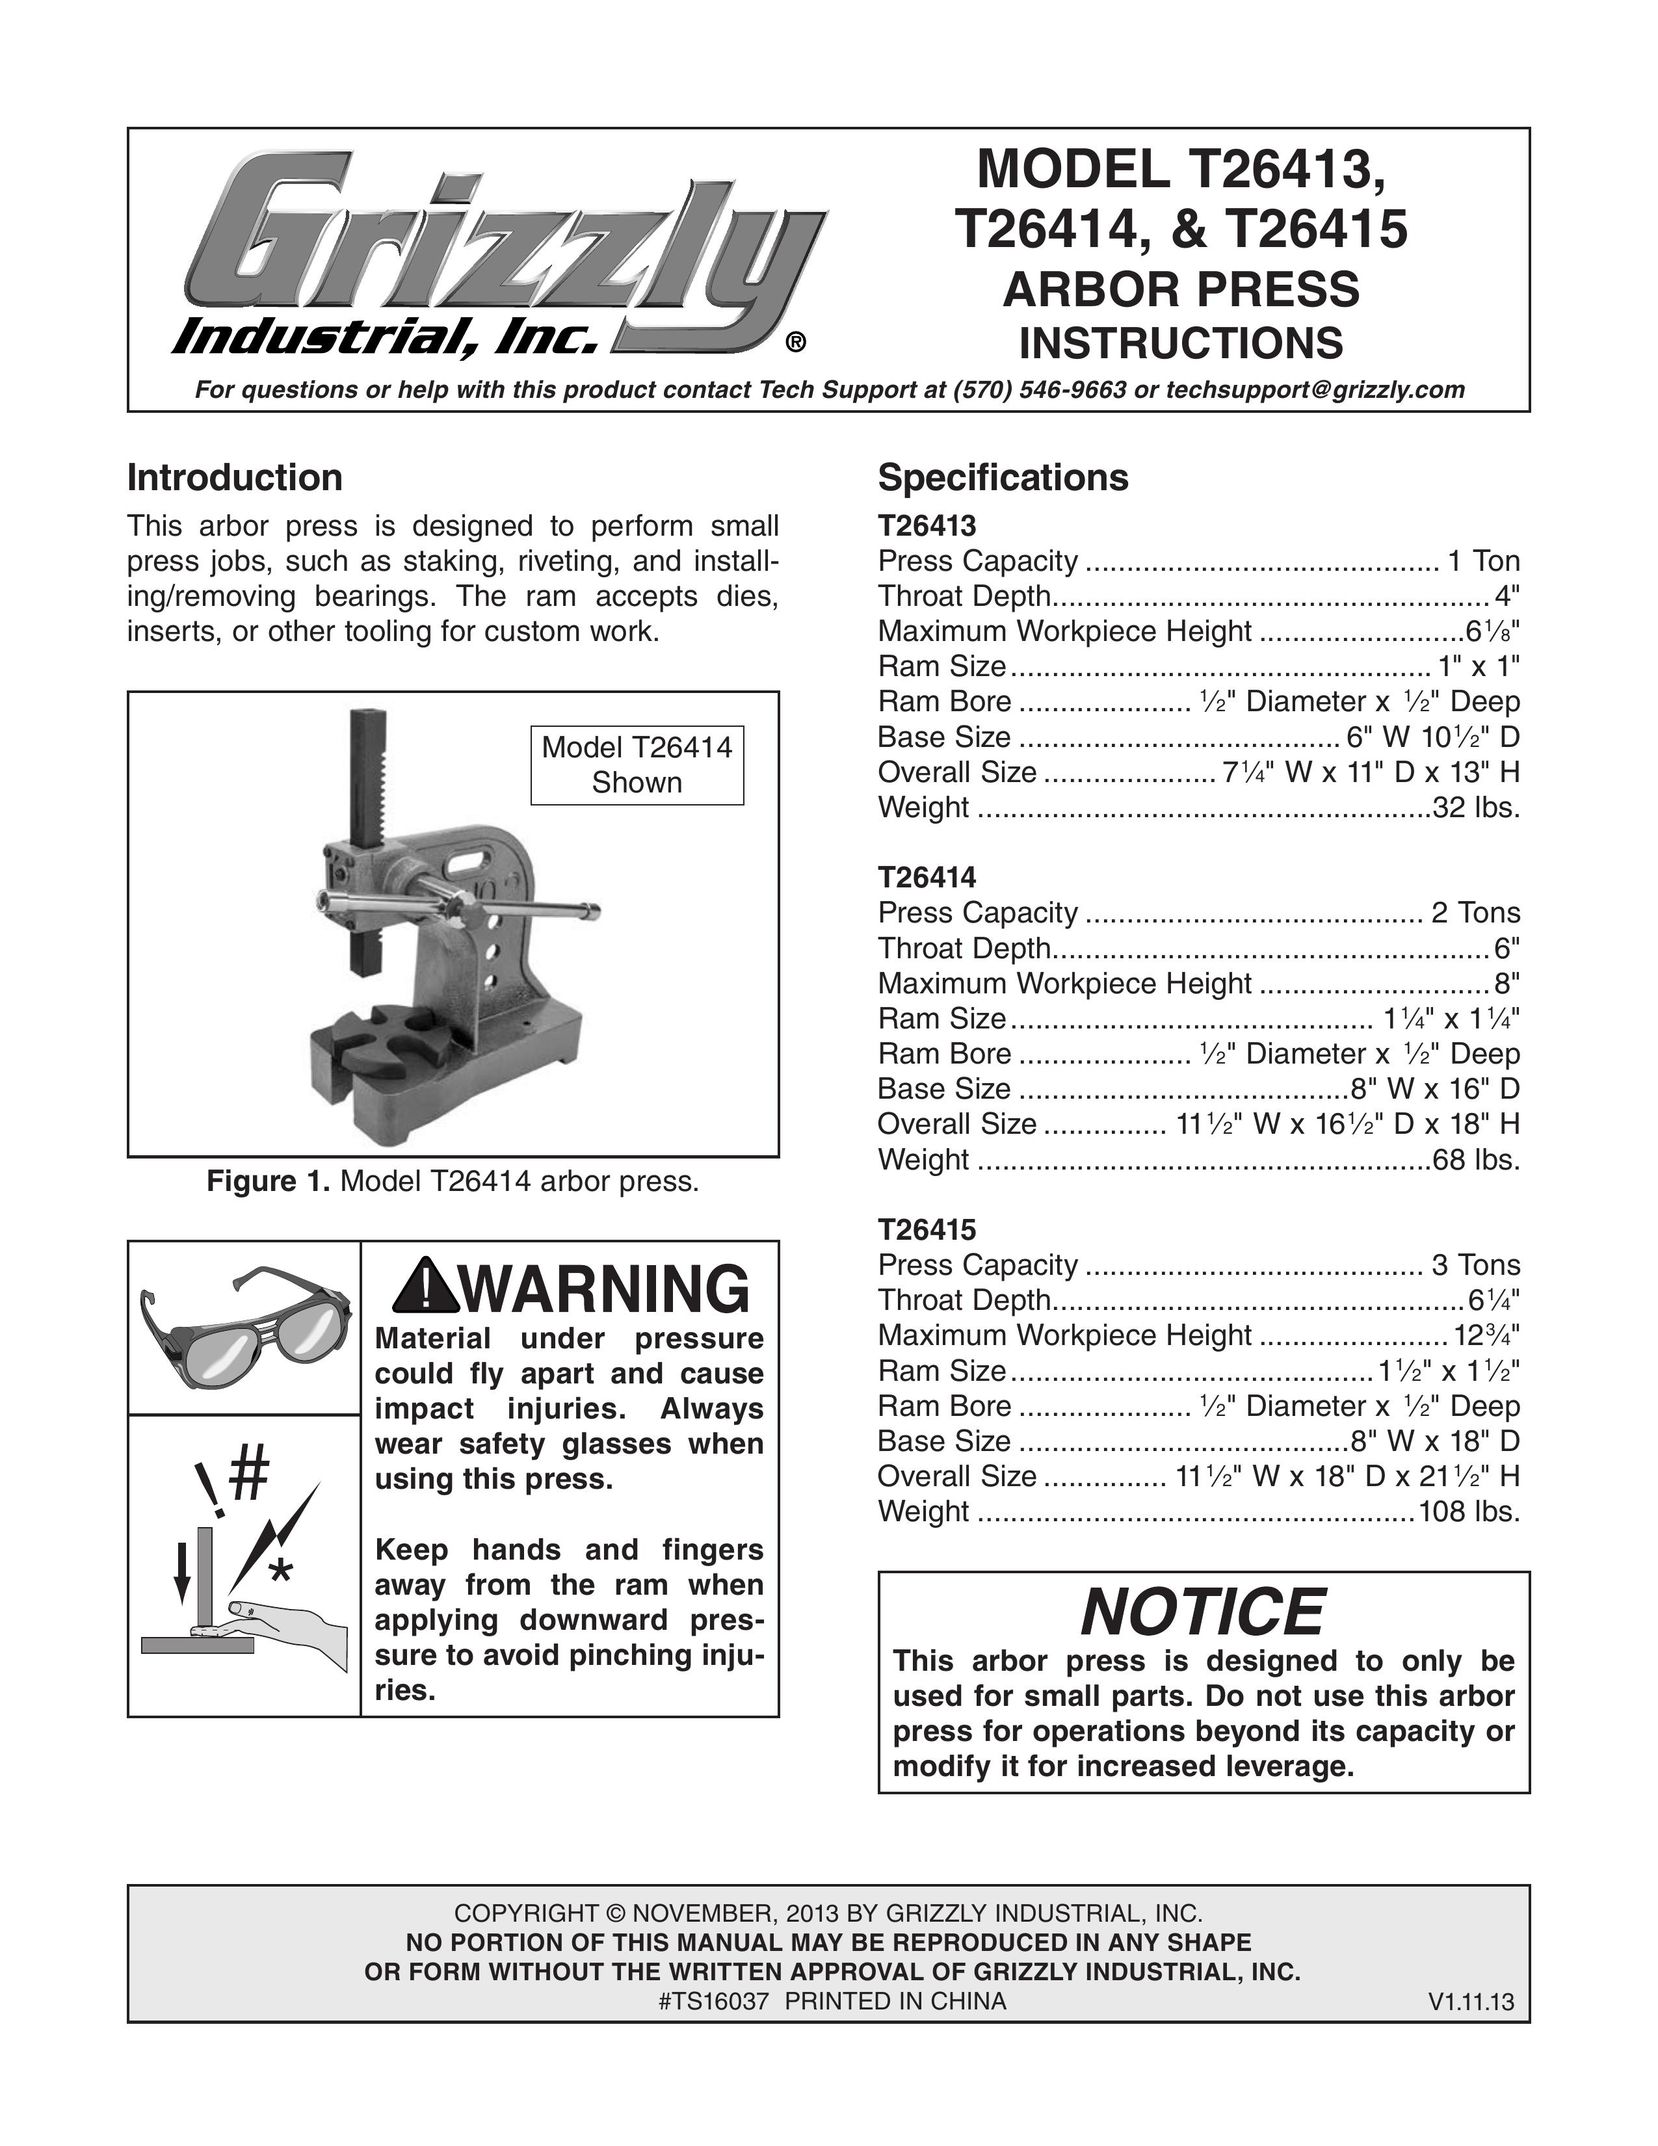 Grizzly T26413 Doll User Manual